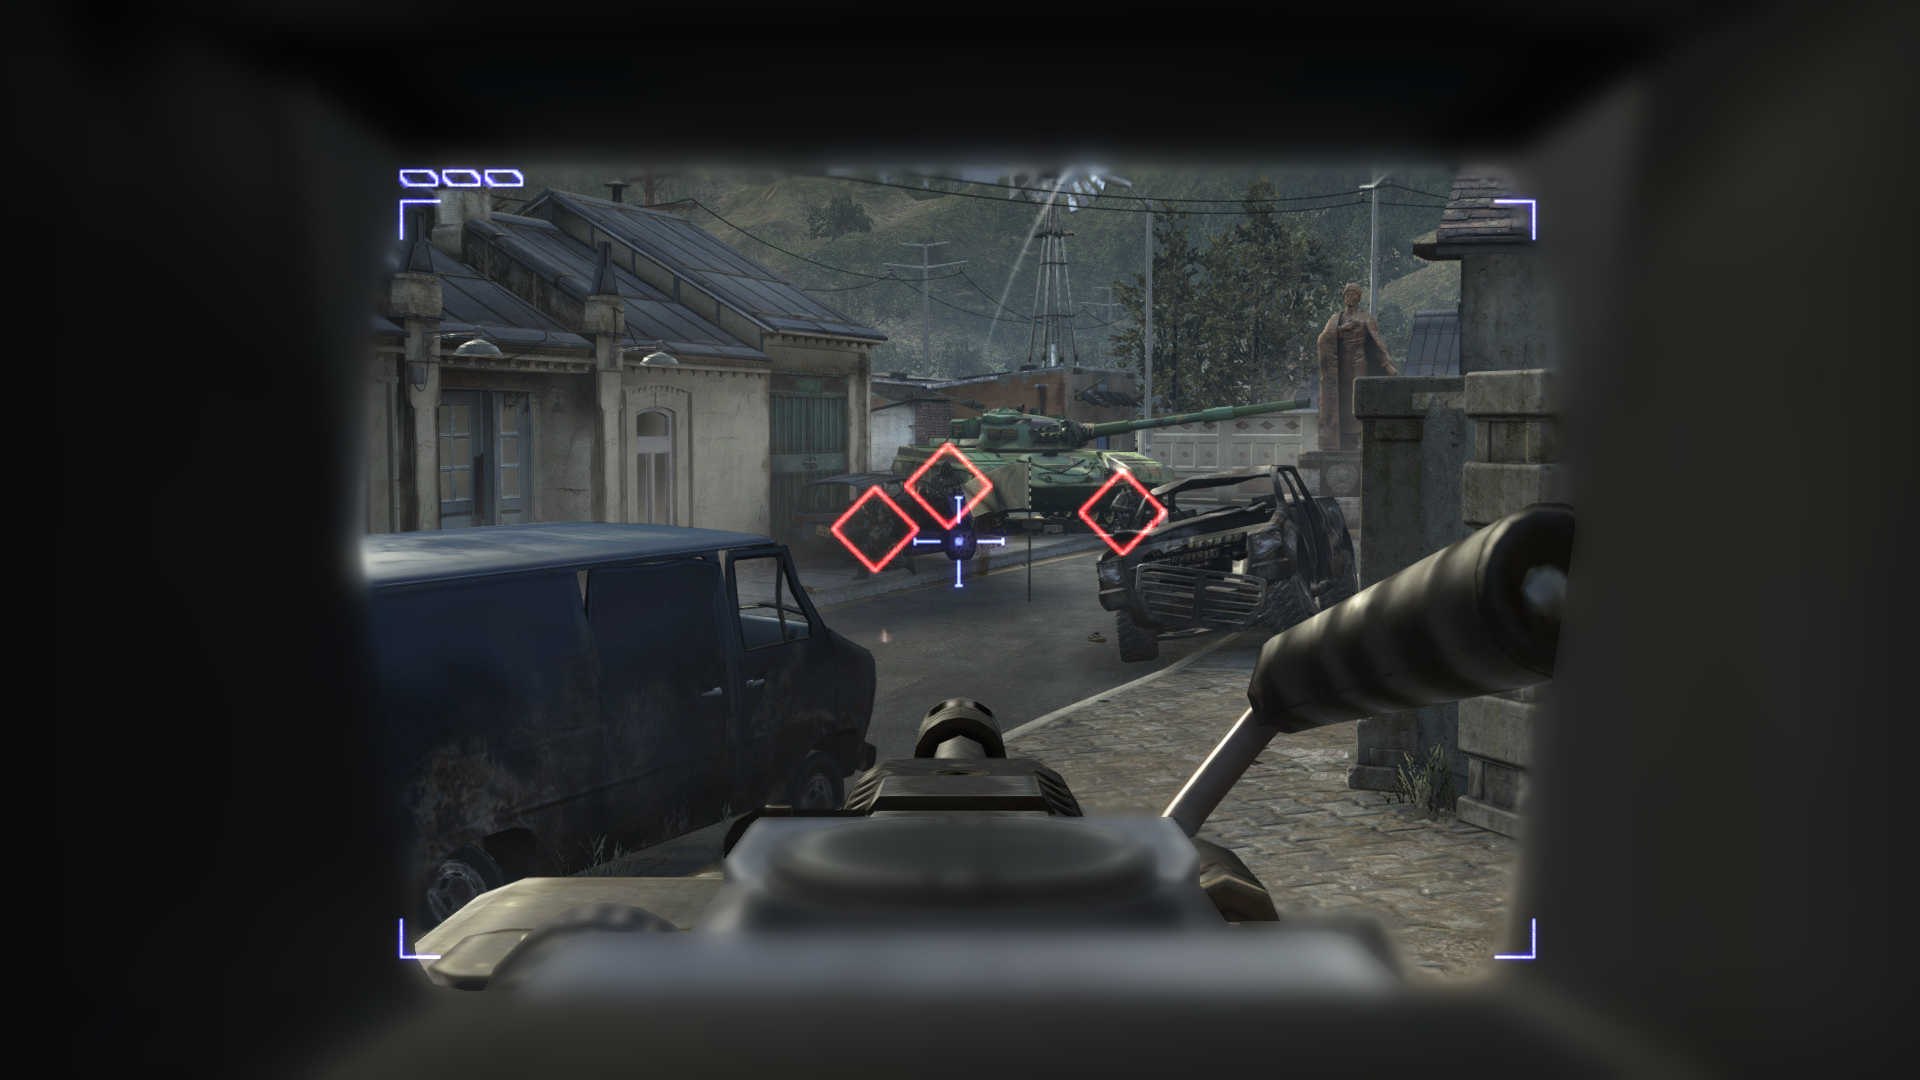 Target Finder images - The Call of Duty Wiki - Black Ops II, Ghosts ...